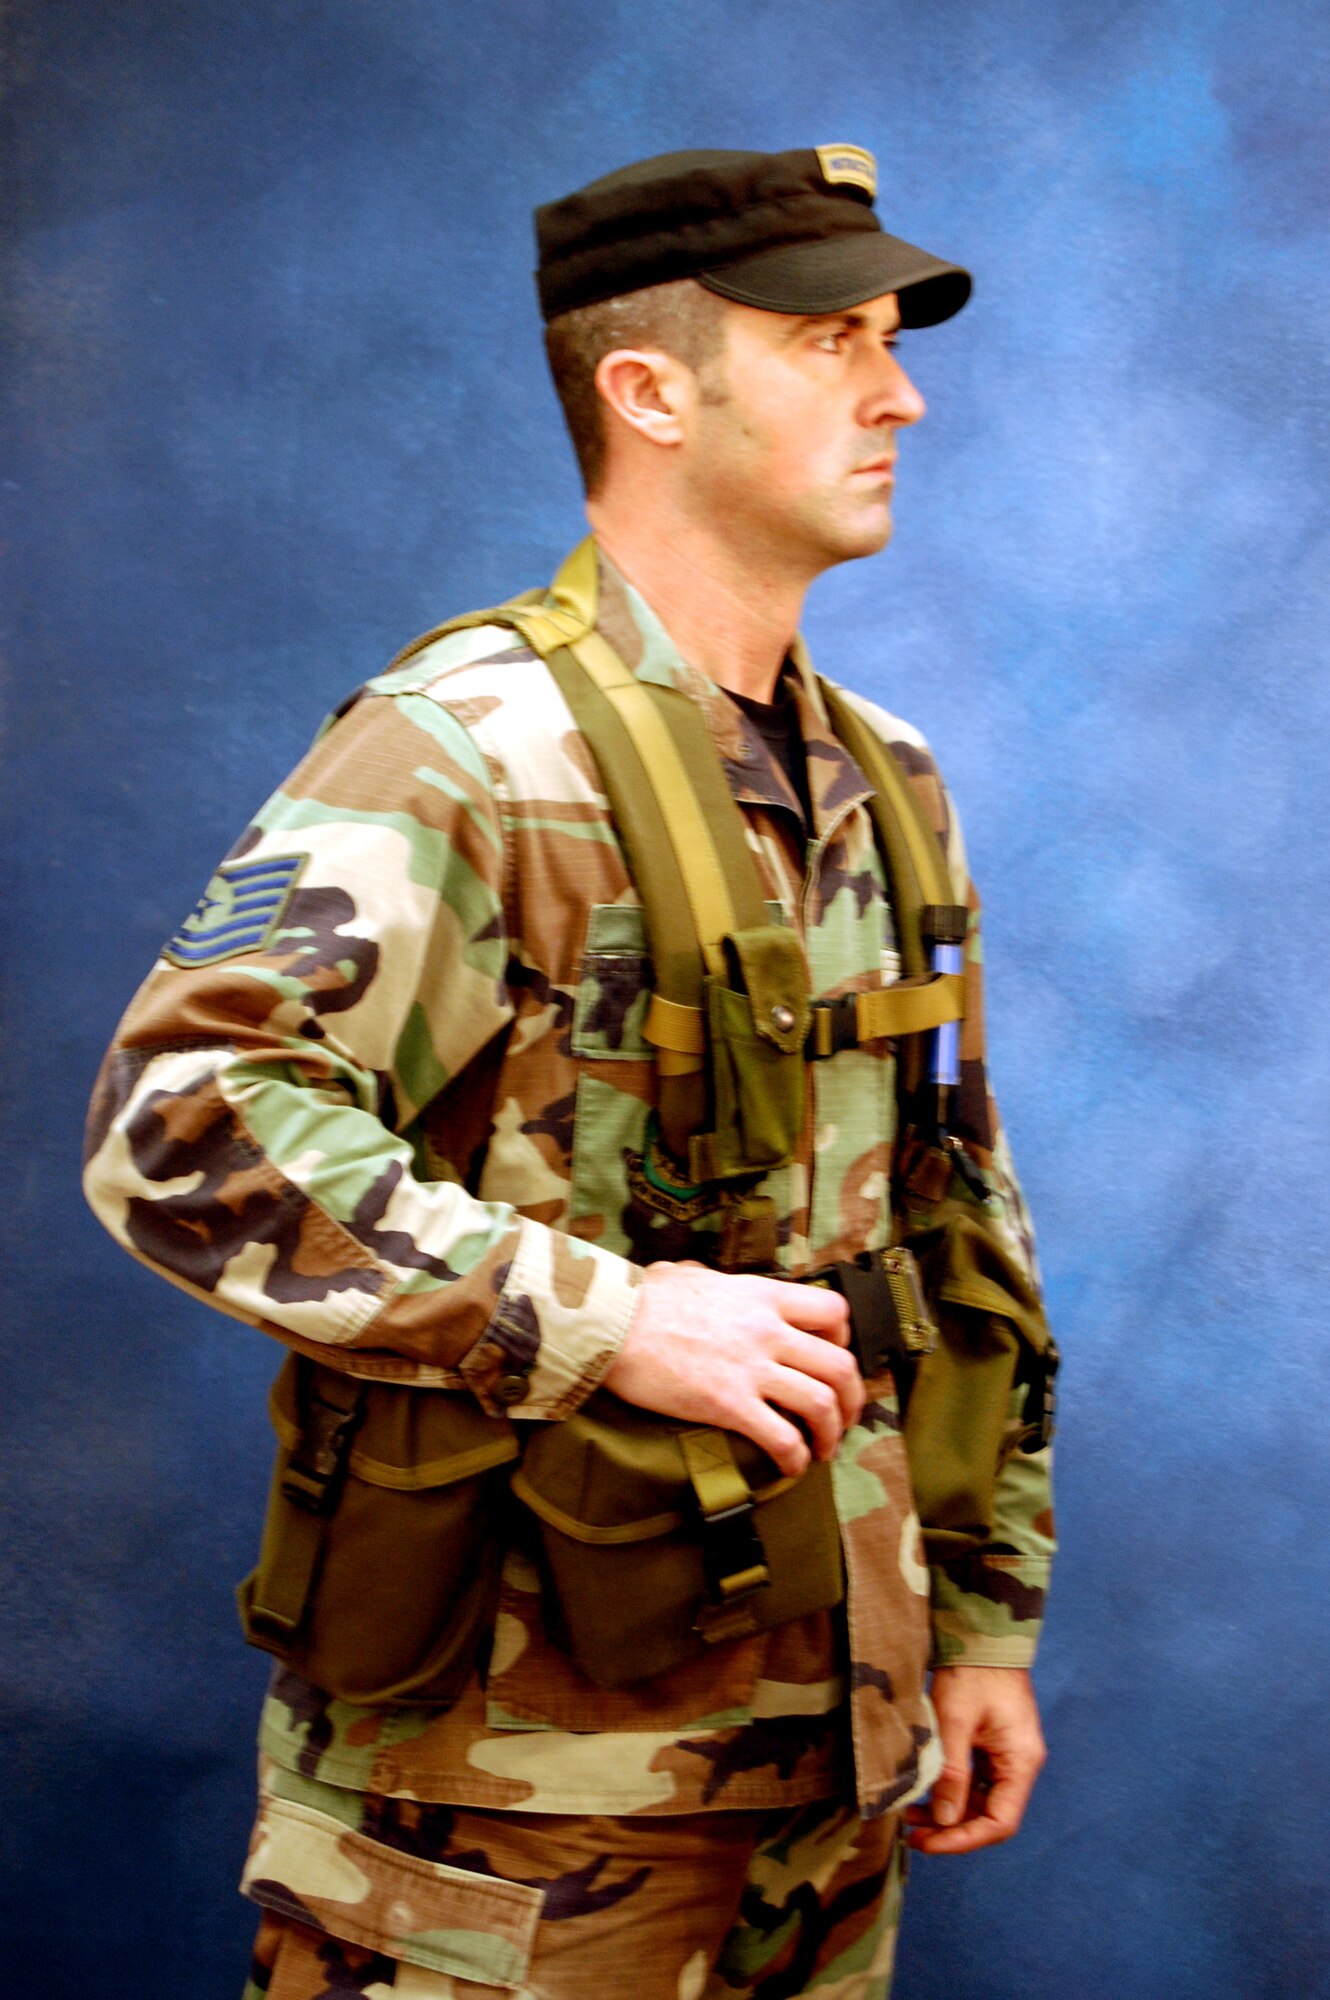 Tech. Sgt. Sean Graves, contingency skills instructor with the U.S. Air Force Expeditionary Center's 421st Combat Training Squadron, models for a photo Dec. 11, 2008, in the Expeditionary Center studio on Fort Dix, N.J.  The effort was part of preparatory work by an artist from the Air Force Art Program to complete a painting highlighting Expeditionary Center Airmen. (U.S. Air Force Photo/Tech. Sgt. Scott T. Sturkol)